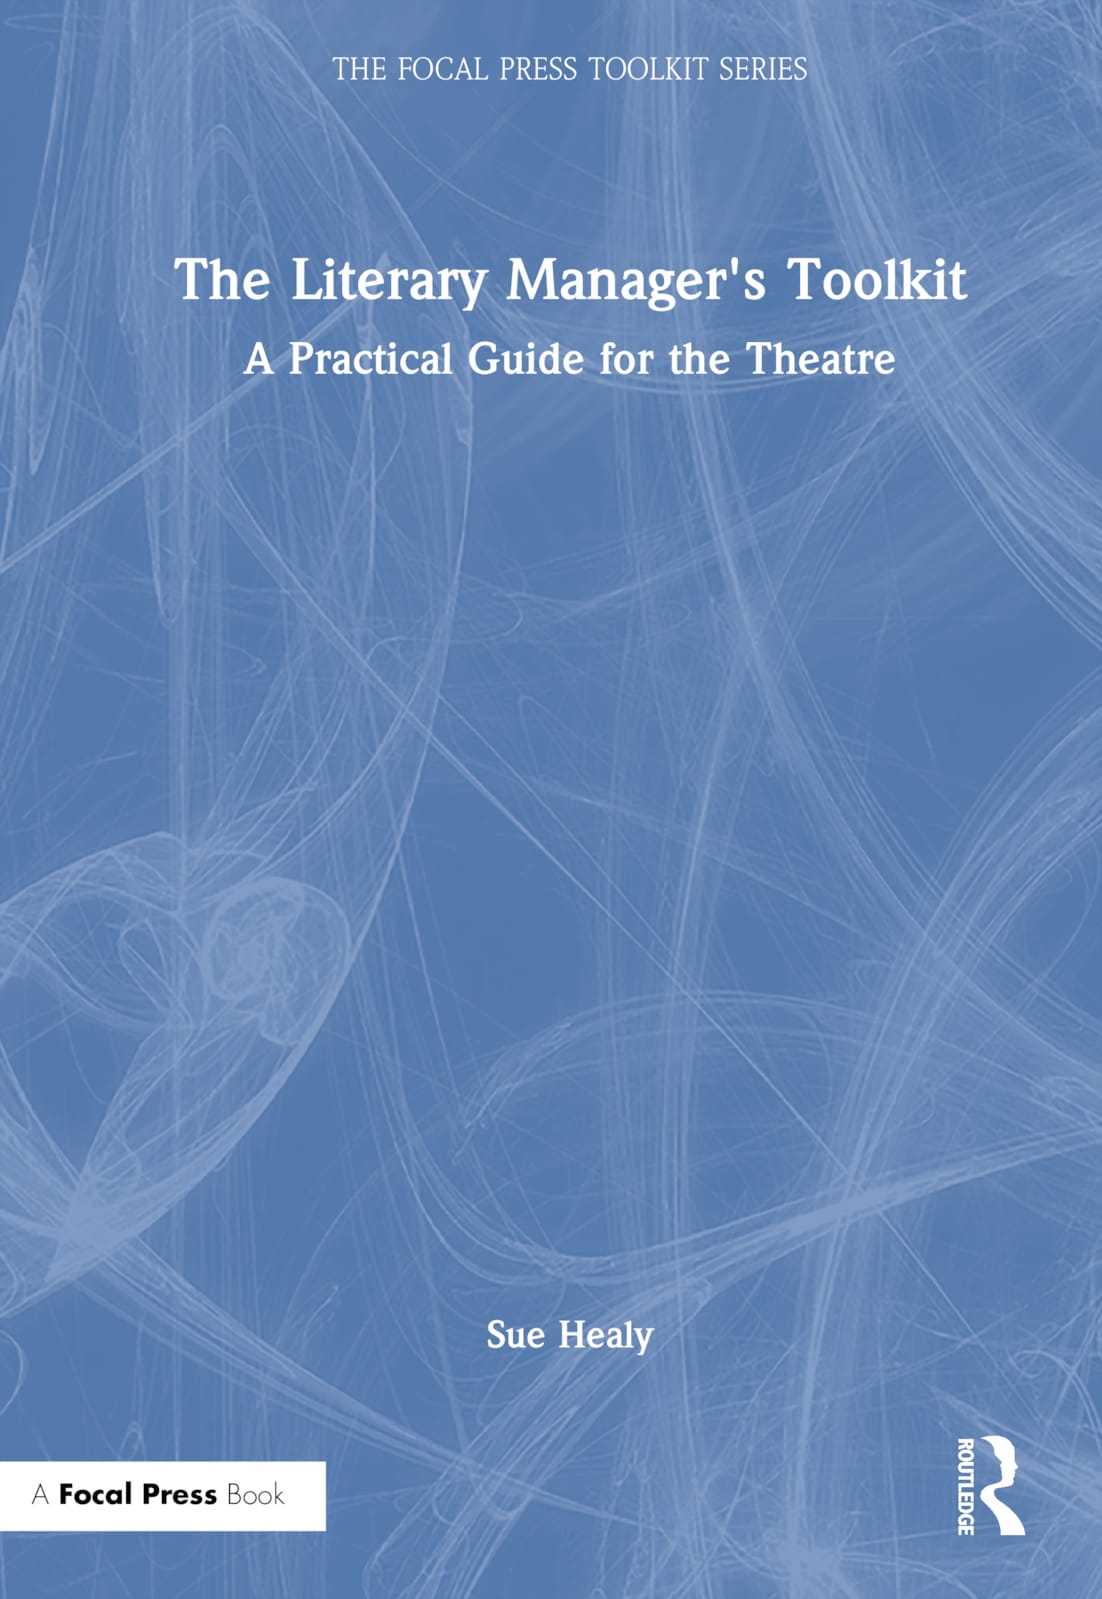 The Literary Manager’s Toolkit: A Practical Guide for the Theatre